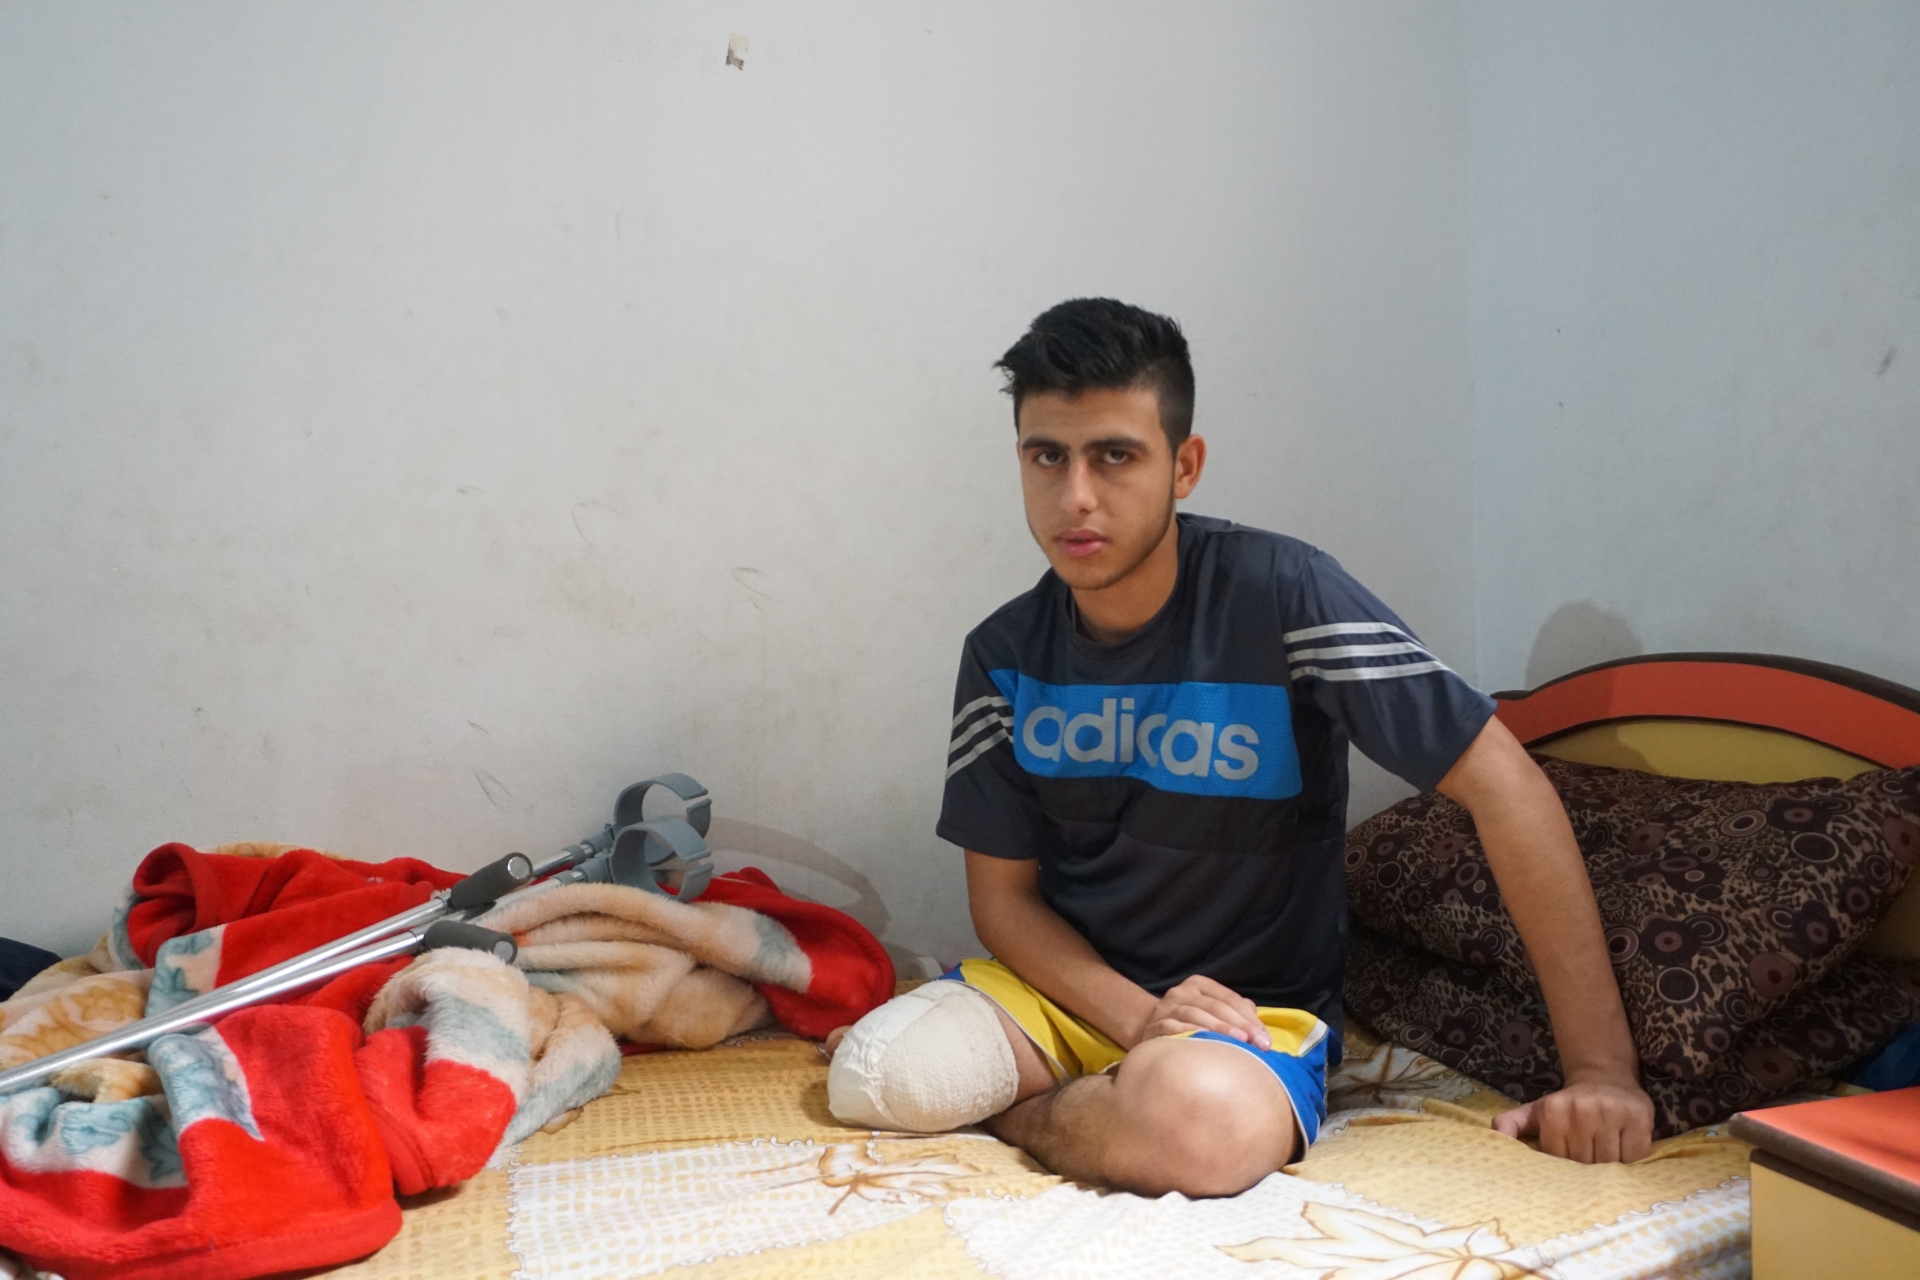 Mohammed al-Ajouri. Right leg amputated after he was shot and injured by Israeli forces during a demonstration in Gaza on 30 March.